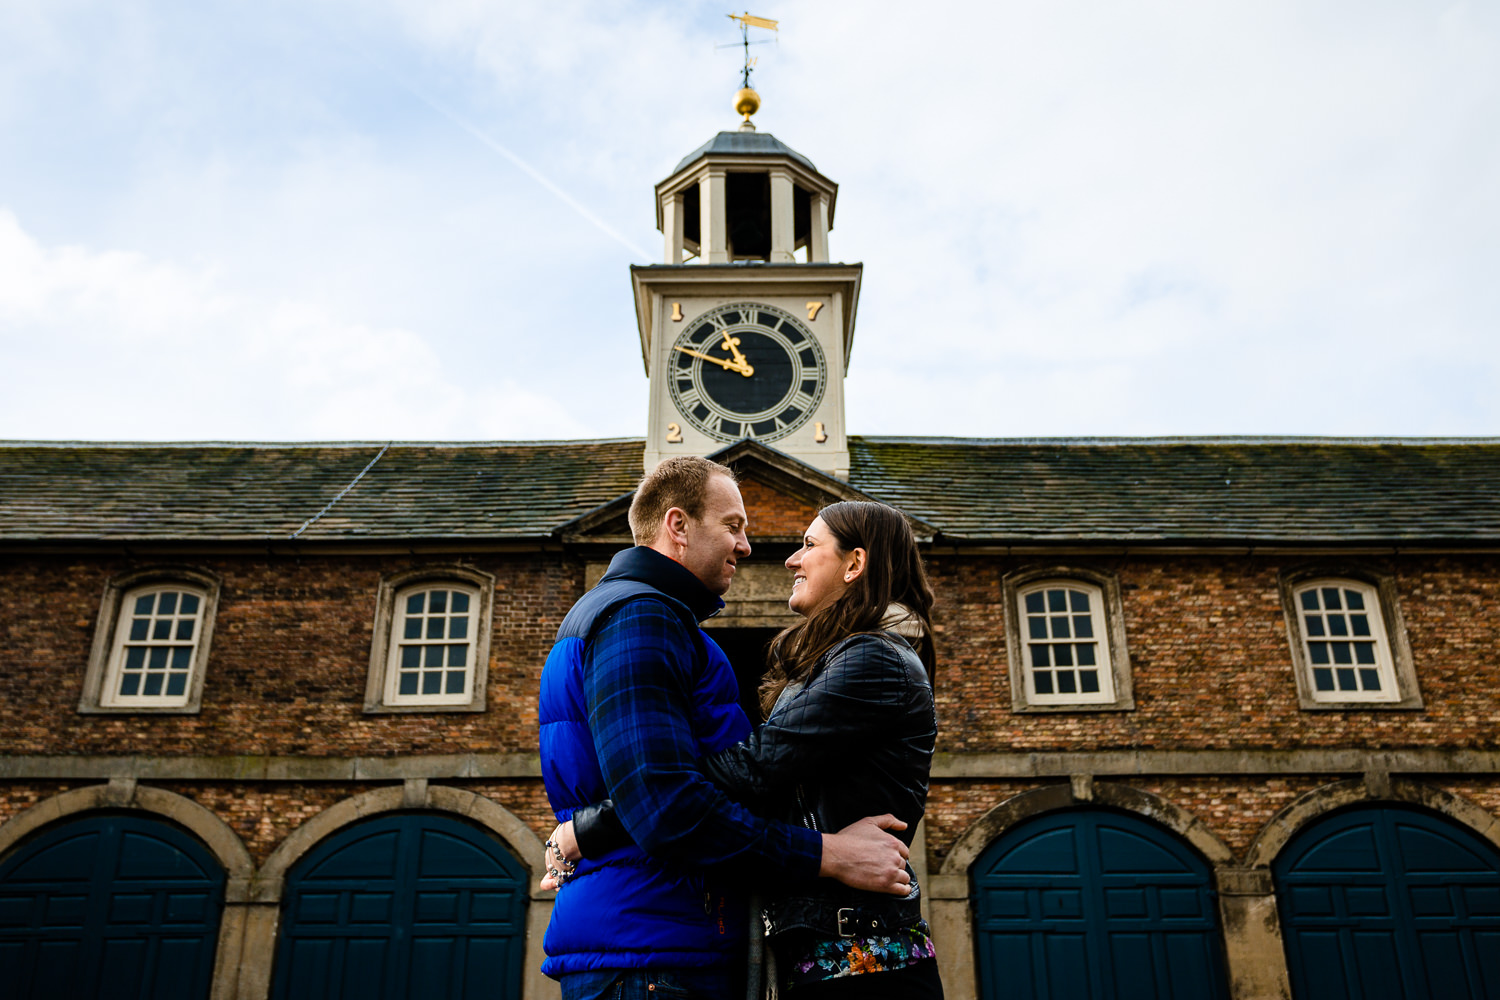 Claire & Damien cuddle in front of the clock tower at Dunham Massey on their pre wedding shoot.